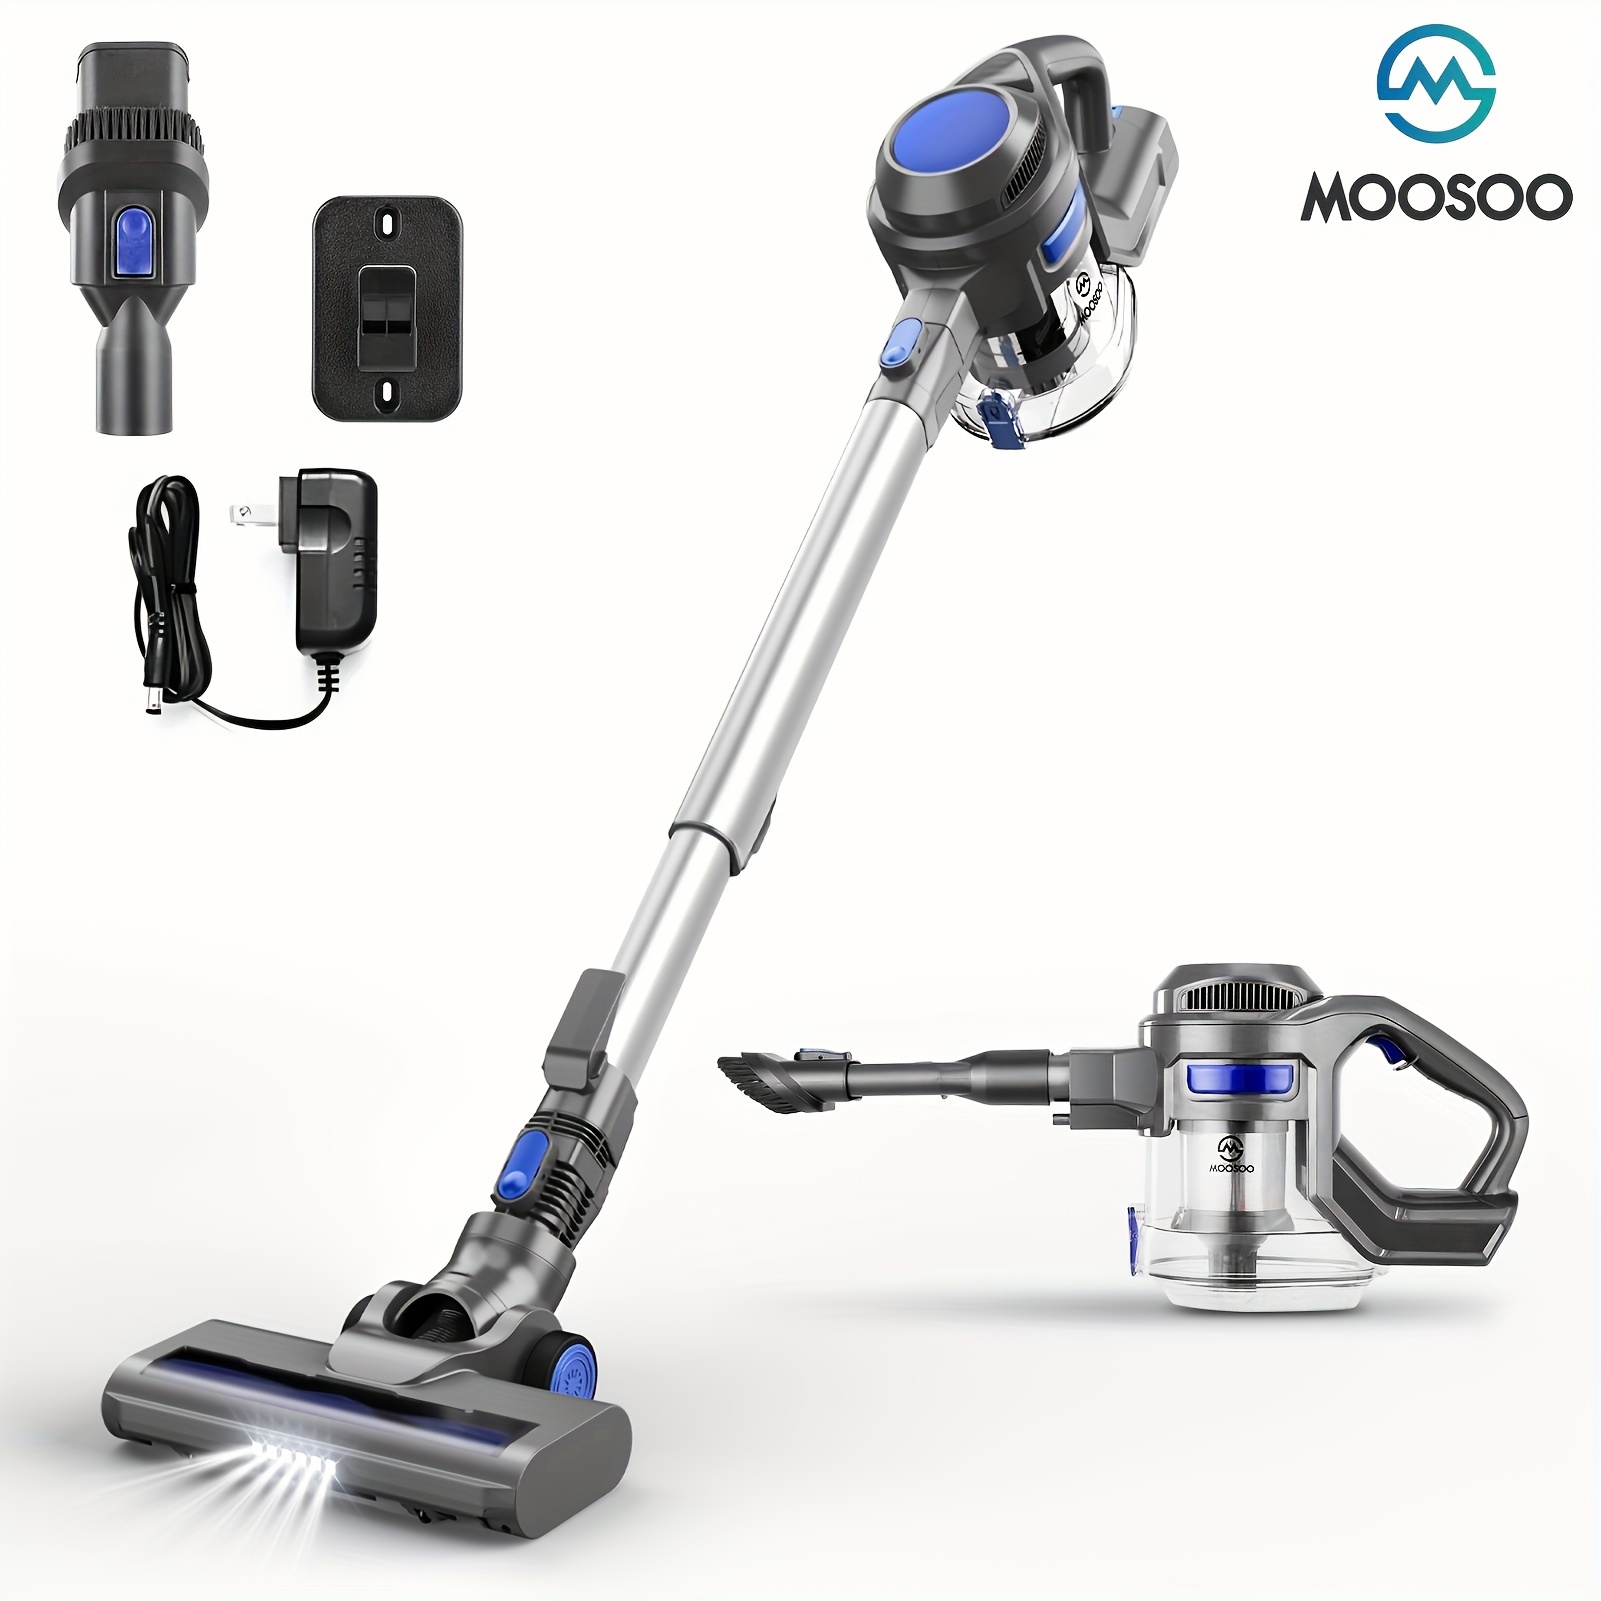 

Cordless Vacuum 4-in-1 Lightweight With Powerful Suction For Hard Floor, Carpet Pet Hair, Xl-618a